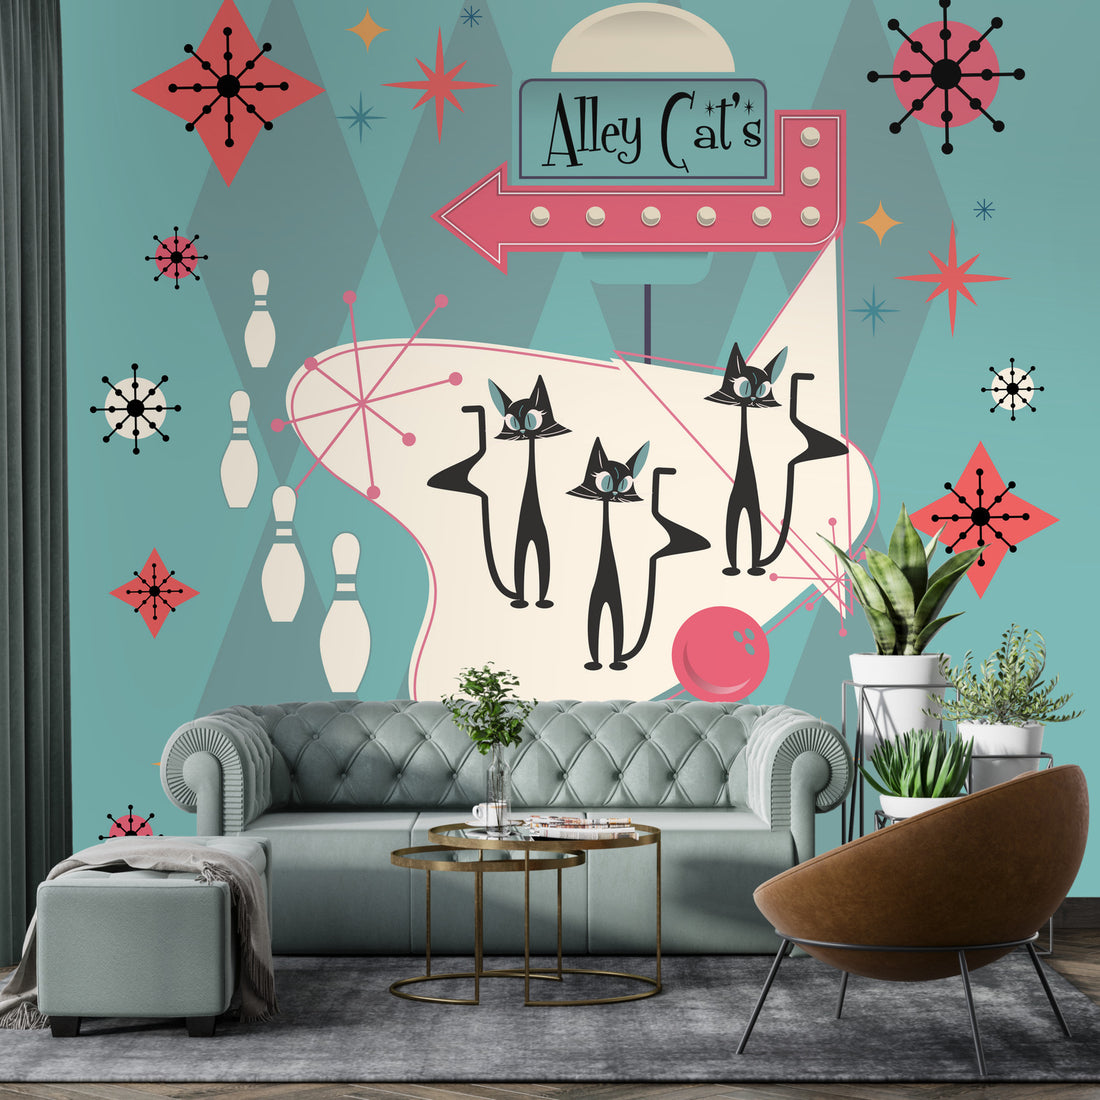 Atomic Cat, Alley Cats, Wallpaper, Removeable, Peel And Stick Mid Century ModernWall Murals